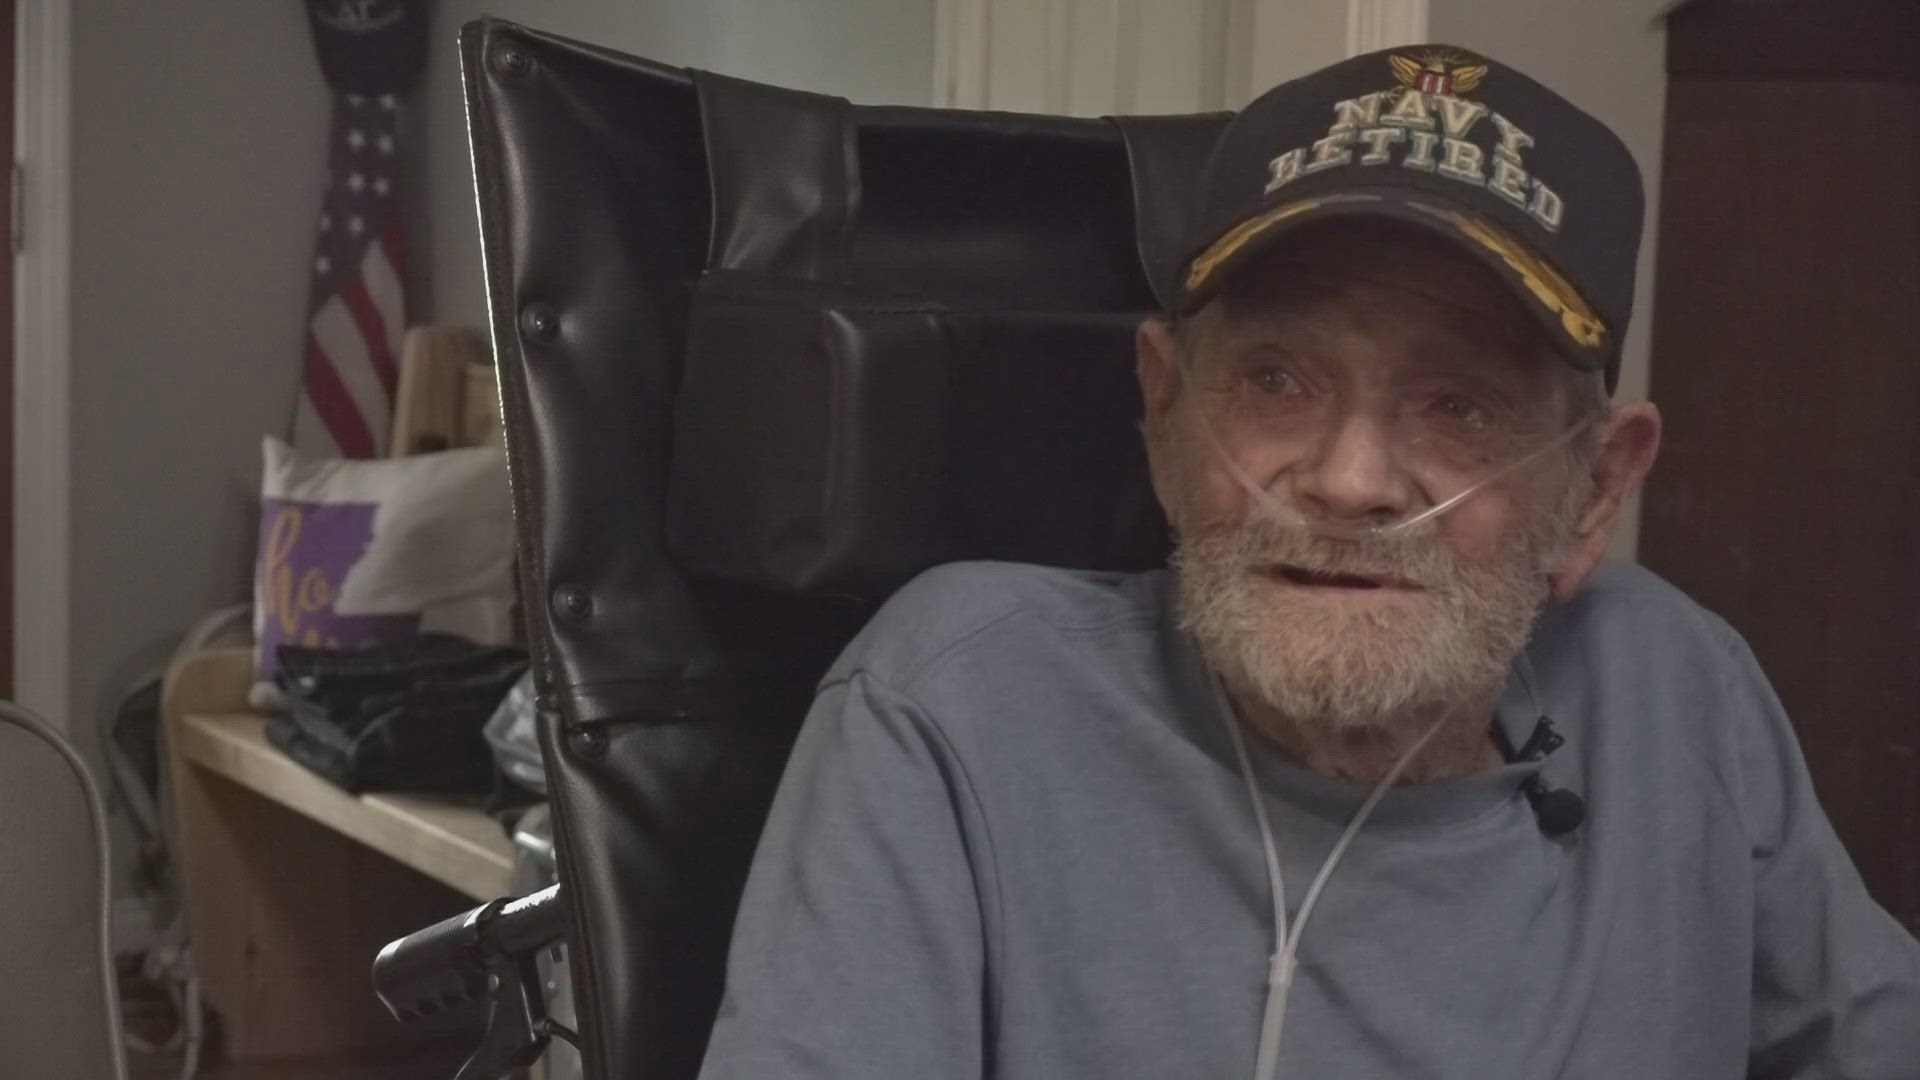 Eighty-year-old Kenneth Cobb is a Navy veteran and cancer patient who was in need of rescue from house fire in Houma, La., this week.